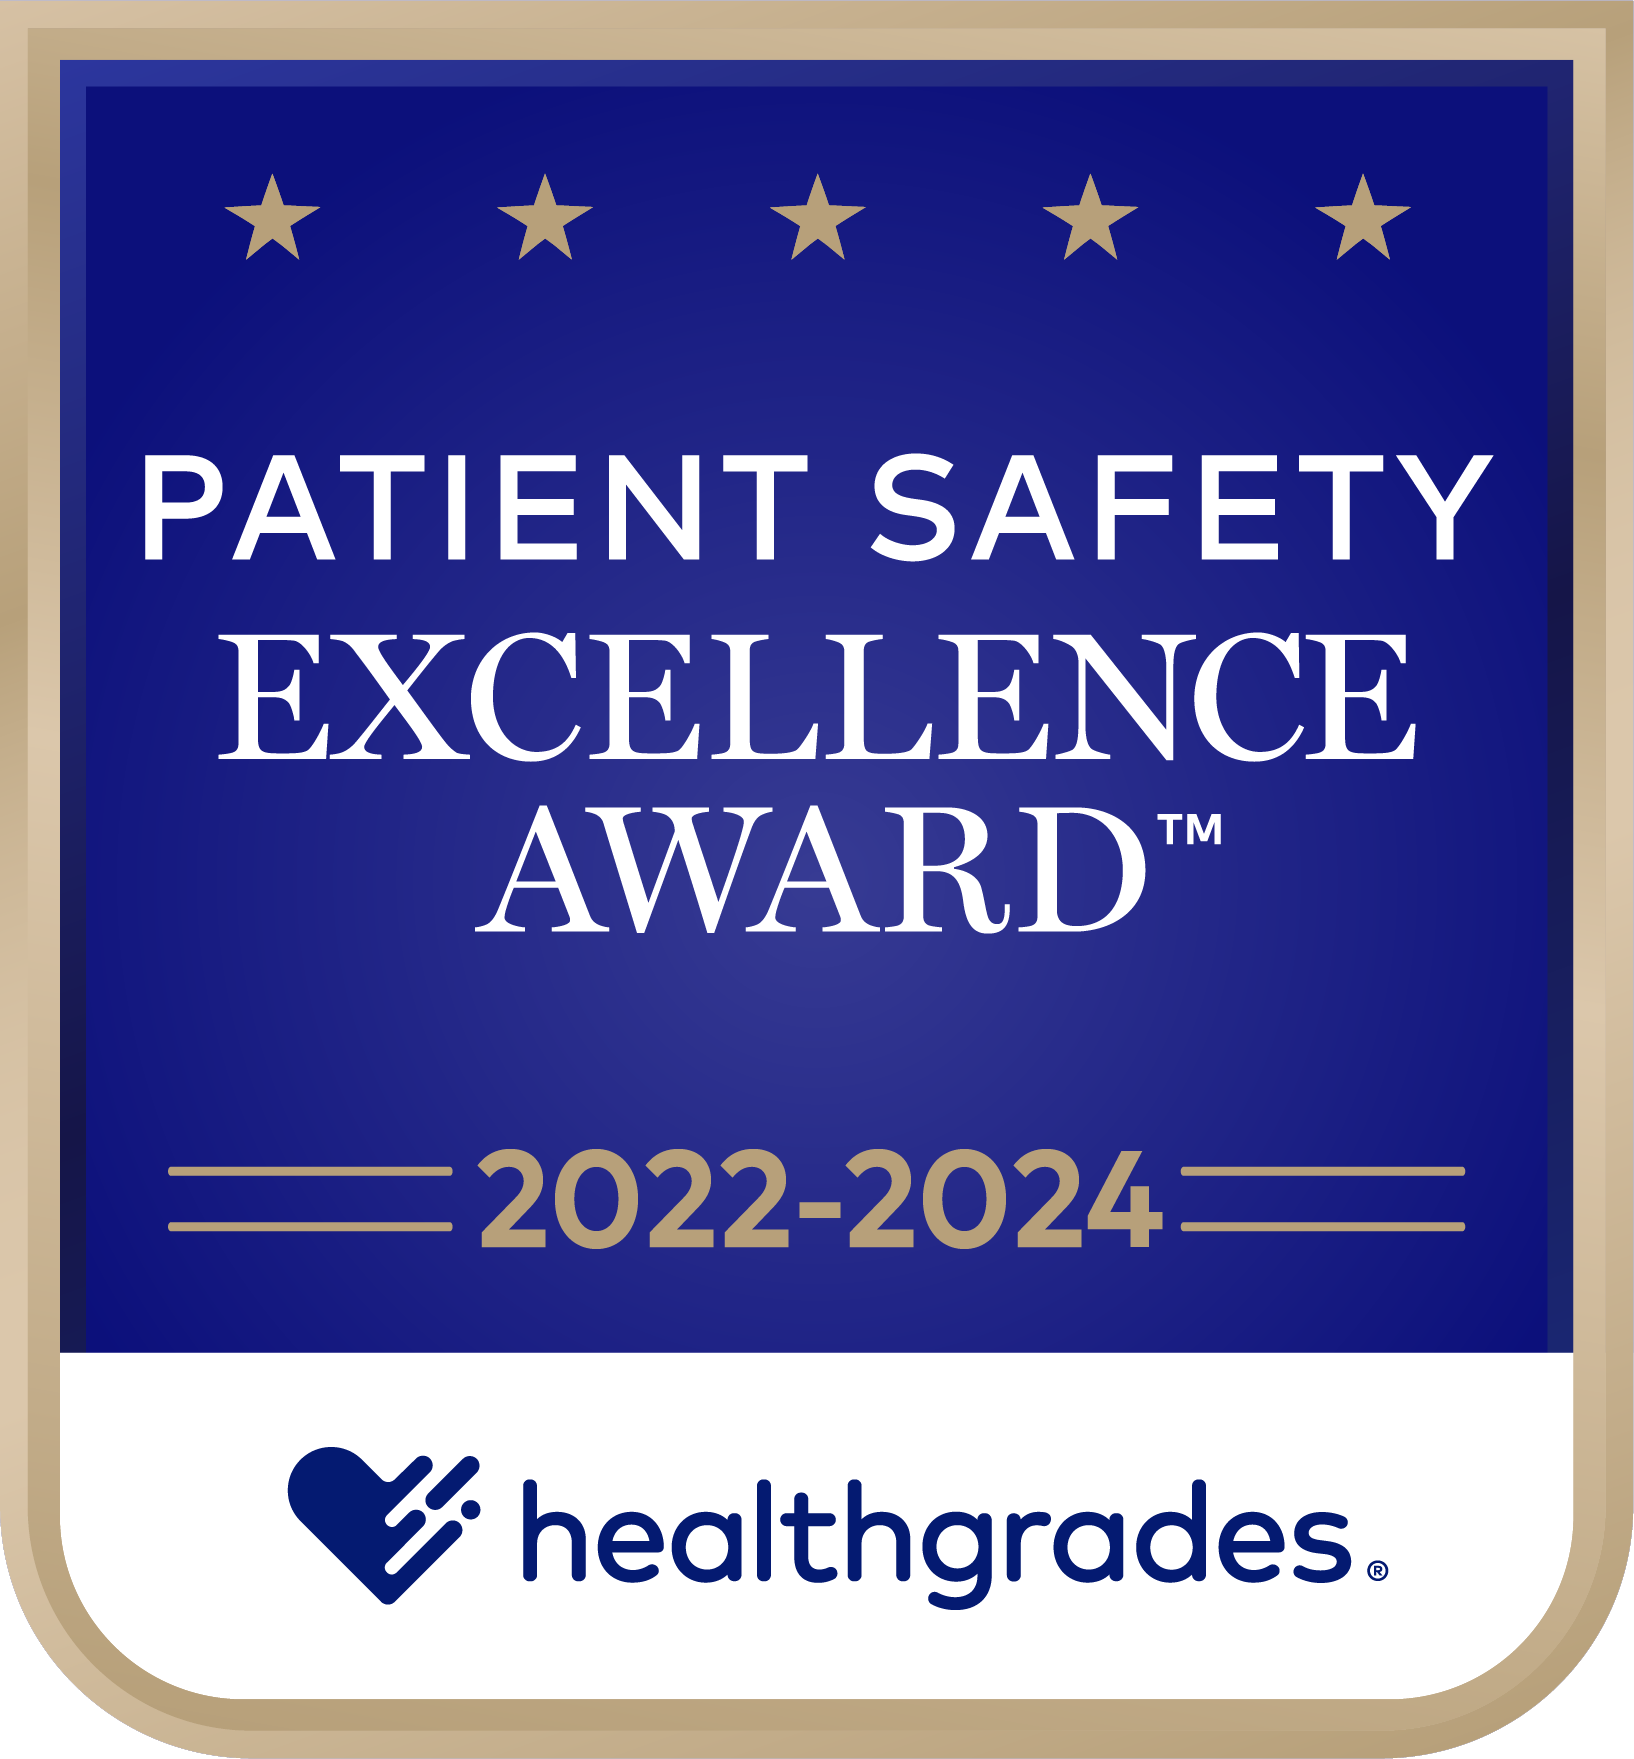 Patient Safety Excellence Award 2022-2023.jpg